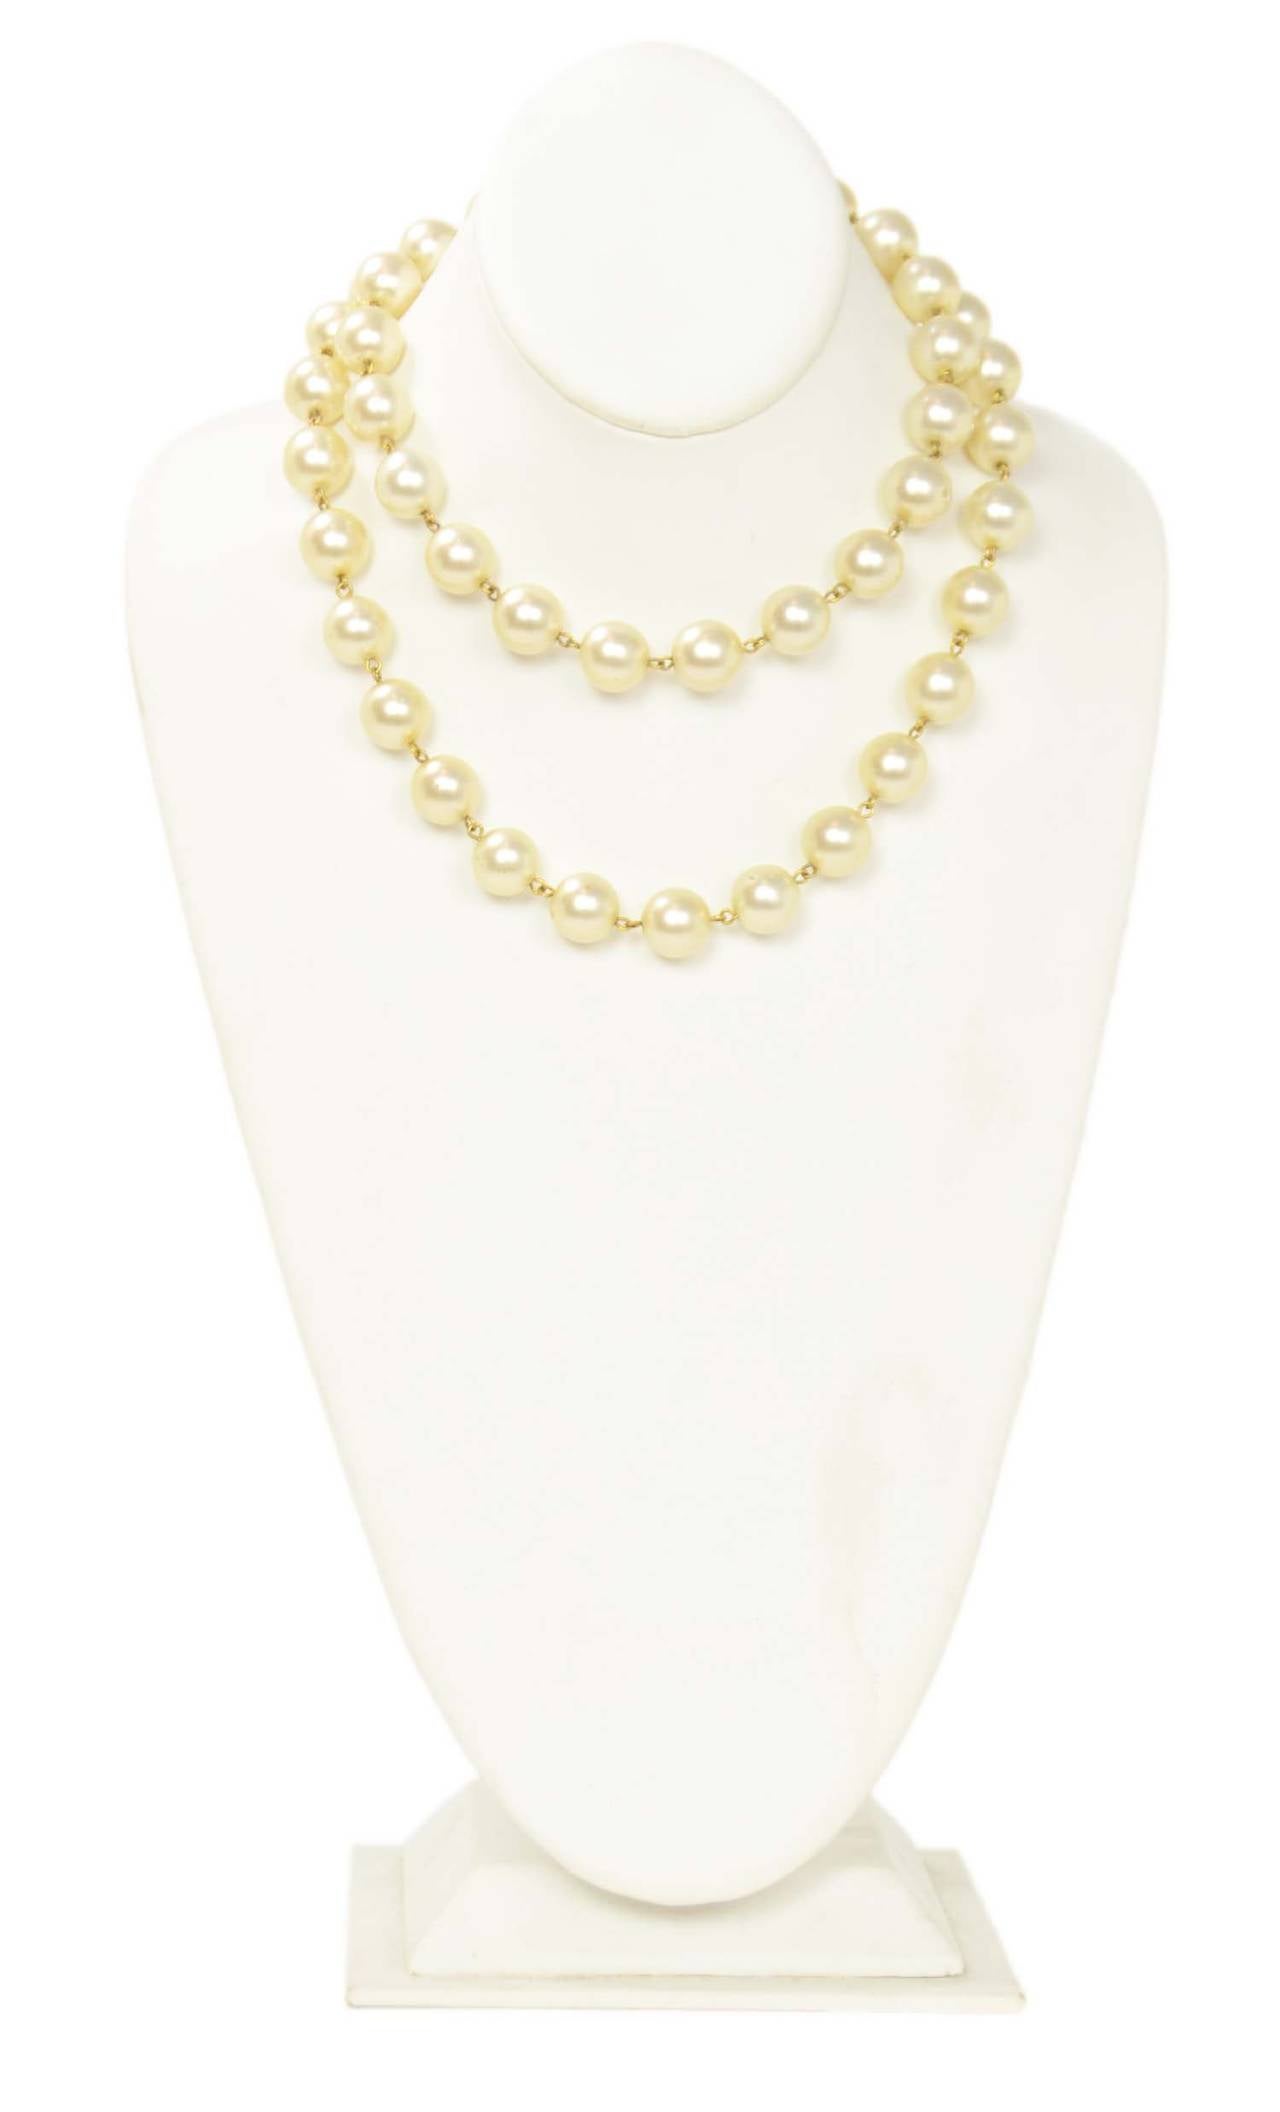 Chanel Vintage '90-'92 Pearl Necklace/Belt w/Gold Star PendantFeatures CC charm at hook closure

    Made in: France
    Year of Production: 1990-1992
    Stamp: CHANEL CC MADE IN FRANCE
    Closure: Hook
    Color: Goldtone and ivory
   